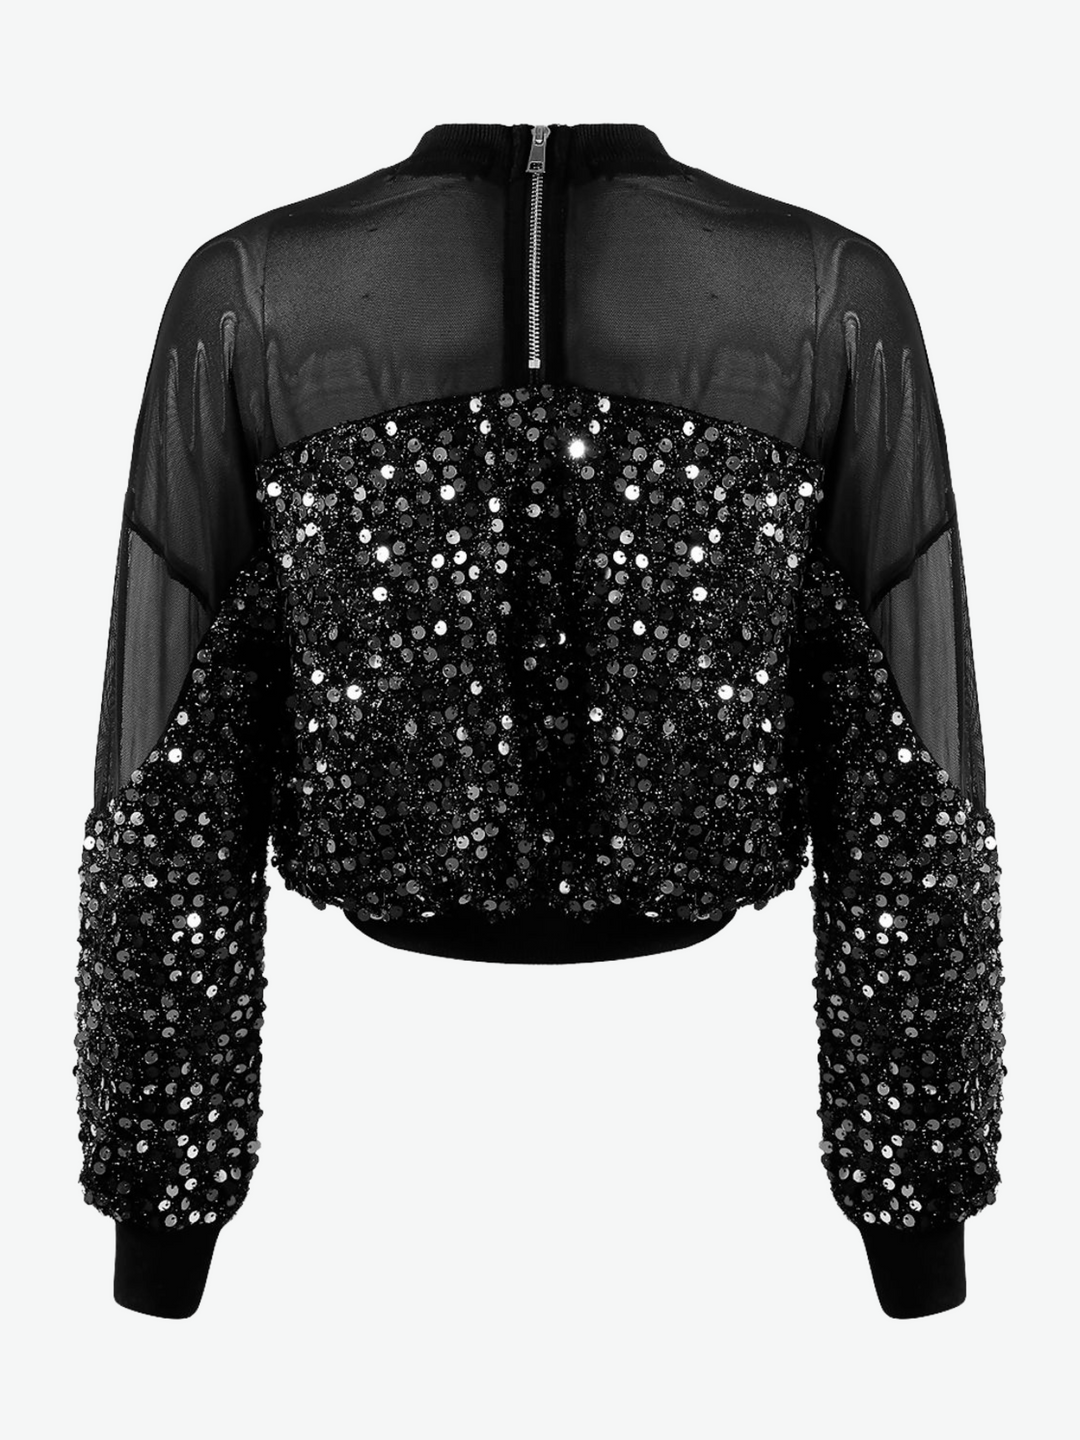 Ghost manequin wears a black Crop top with silver sequins and black mesh panelling at the top and sleeve.  The back of the manequin is visible, including the exposed silver chunky zip.